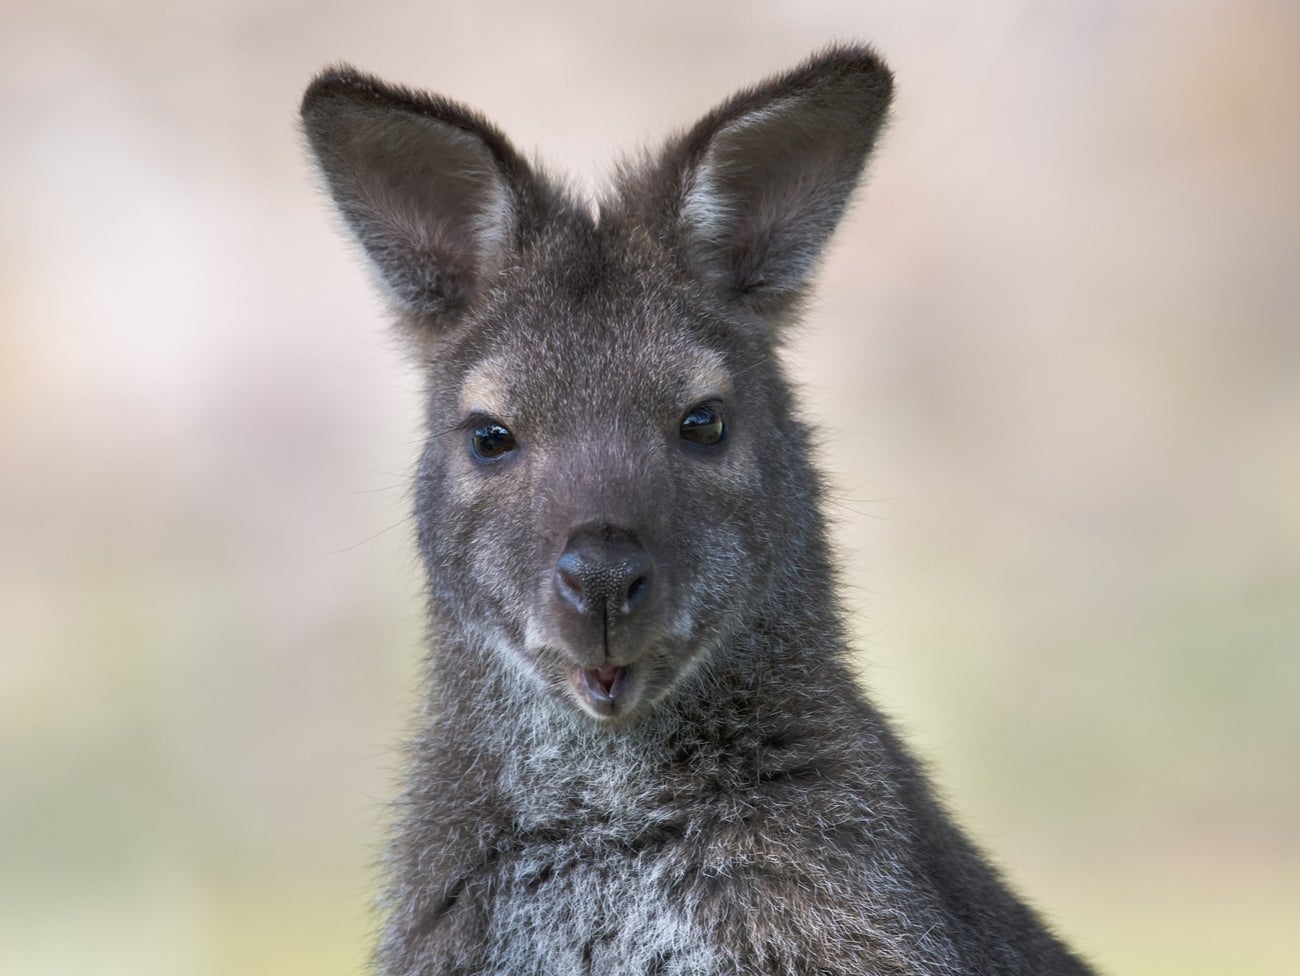 An escaped wallaby in Lincolnshire was captured after three weeks earlier this year